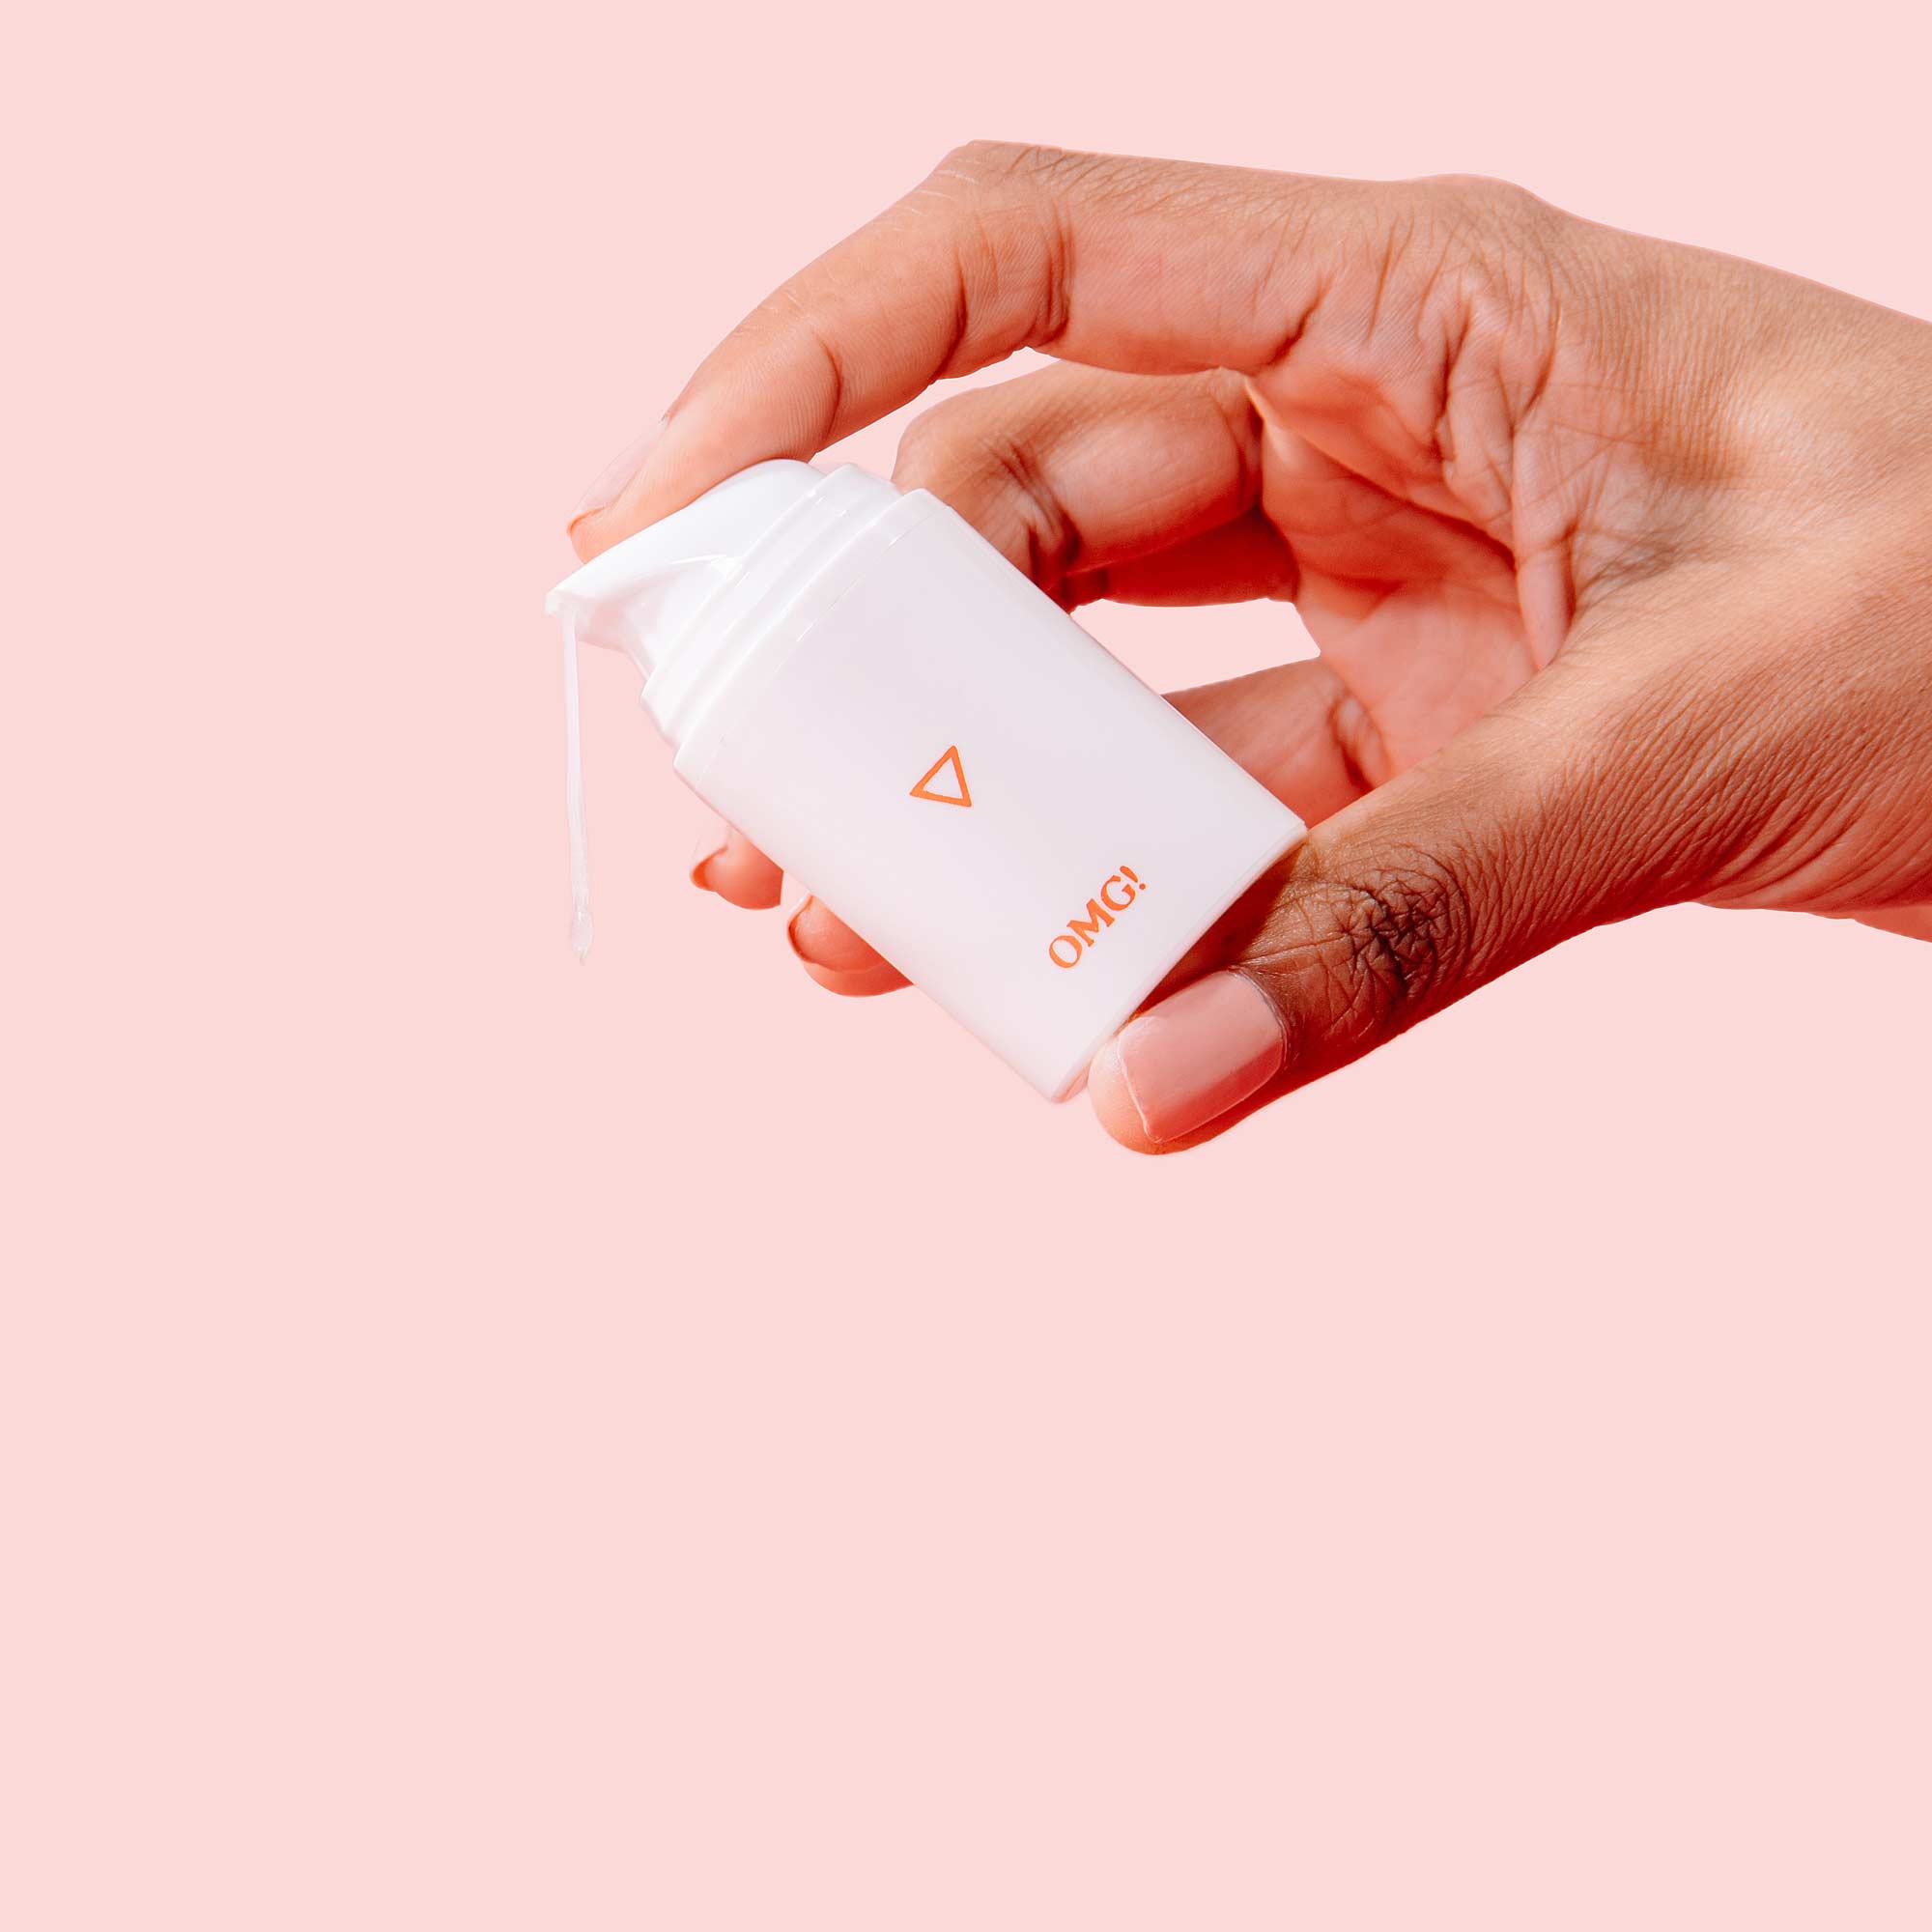 Woman's hand squeezes bottle of Wisp OMG! Cream while cream drips out on a pink background